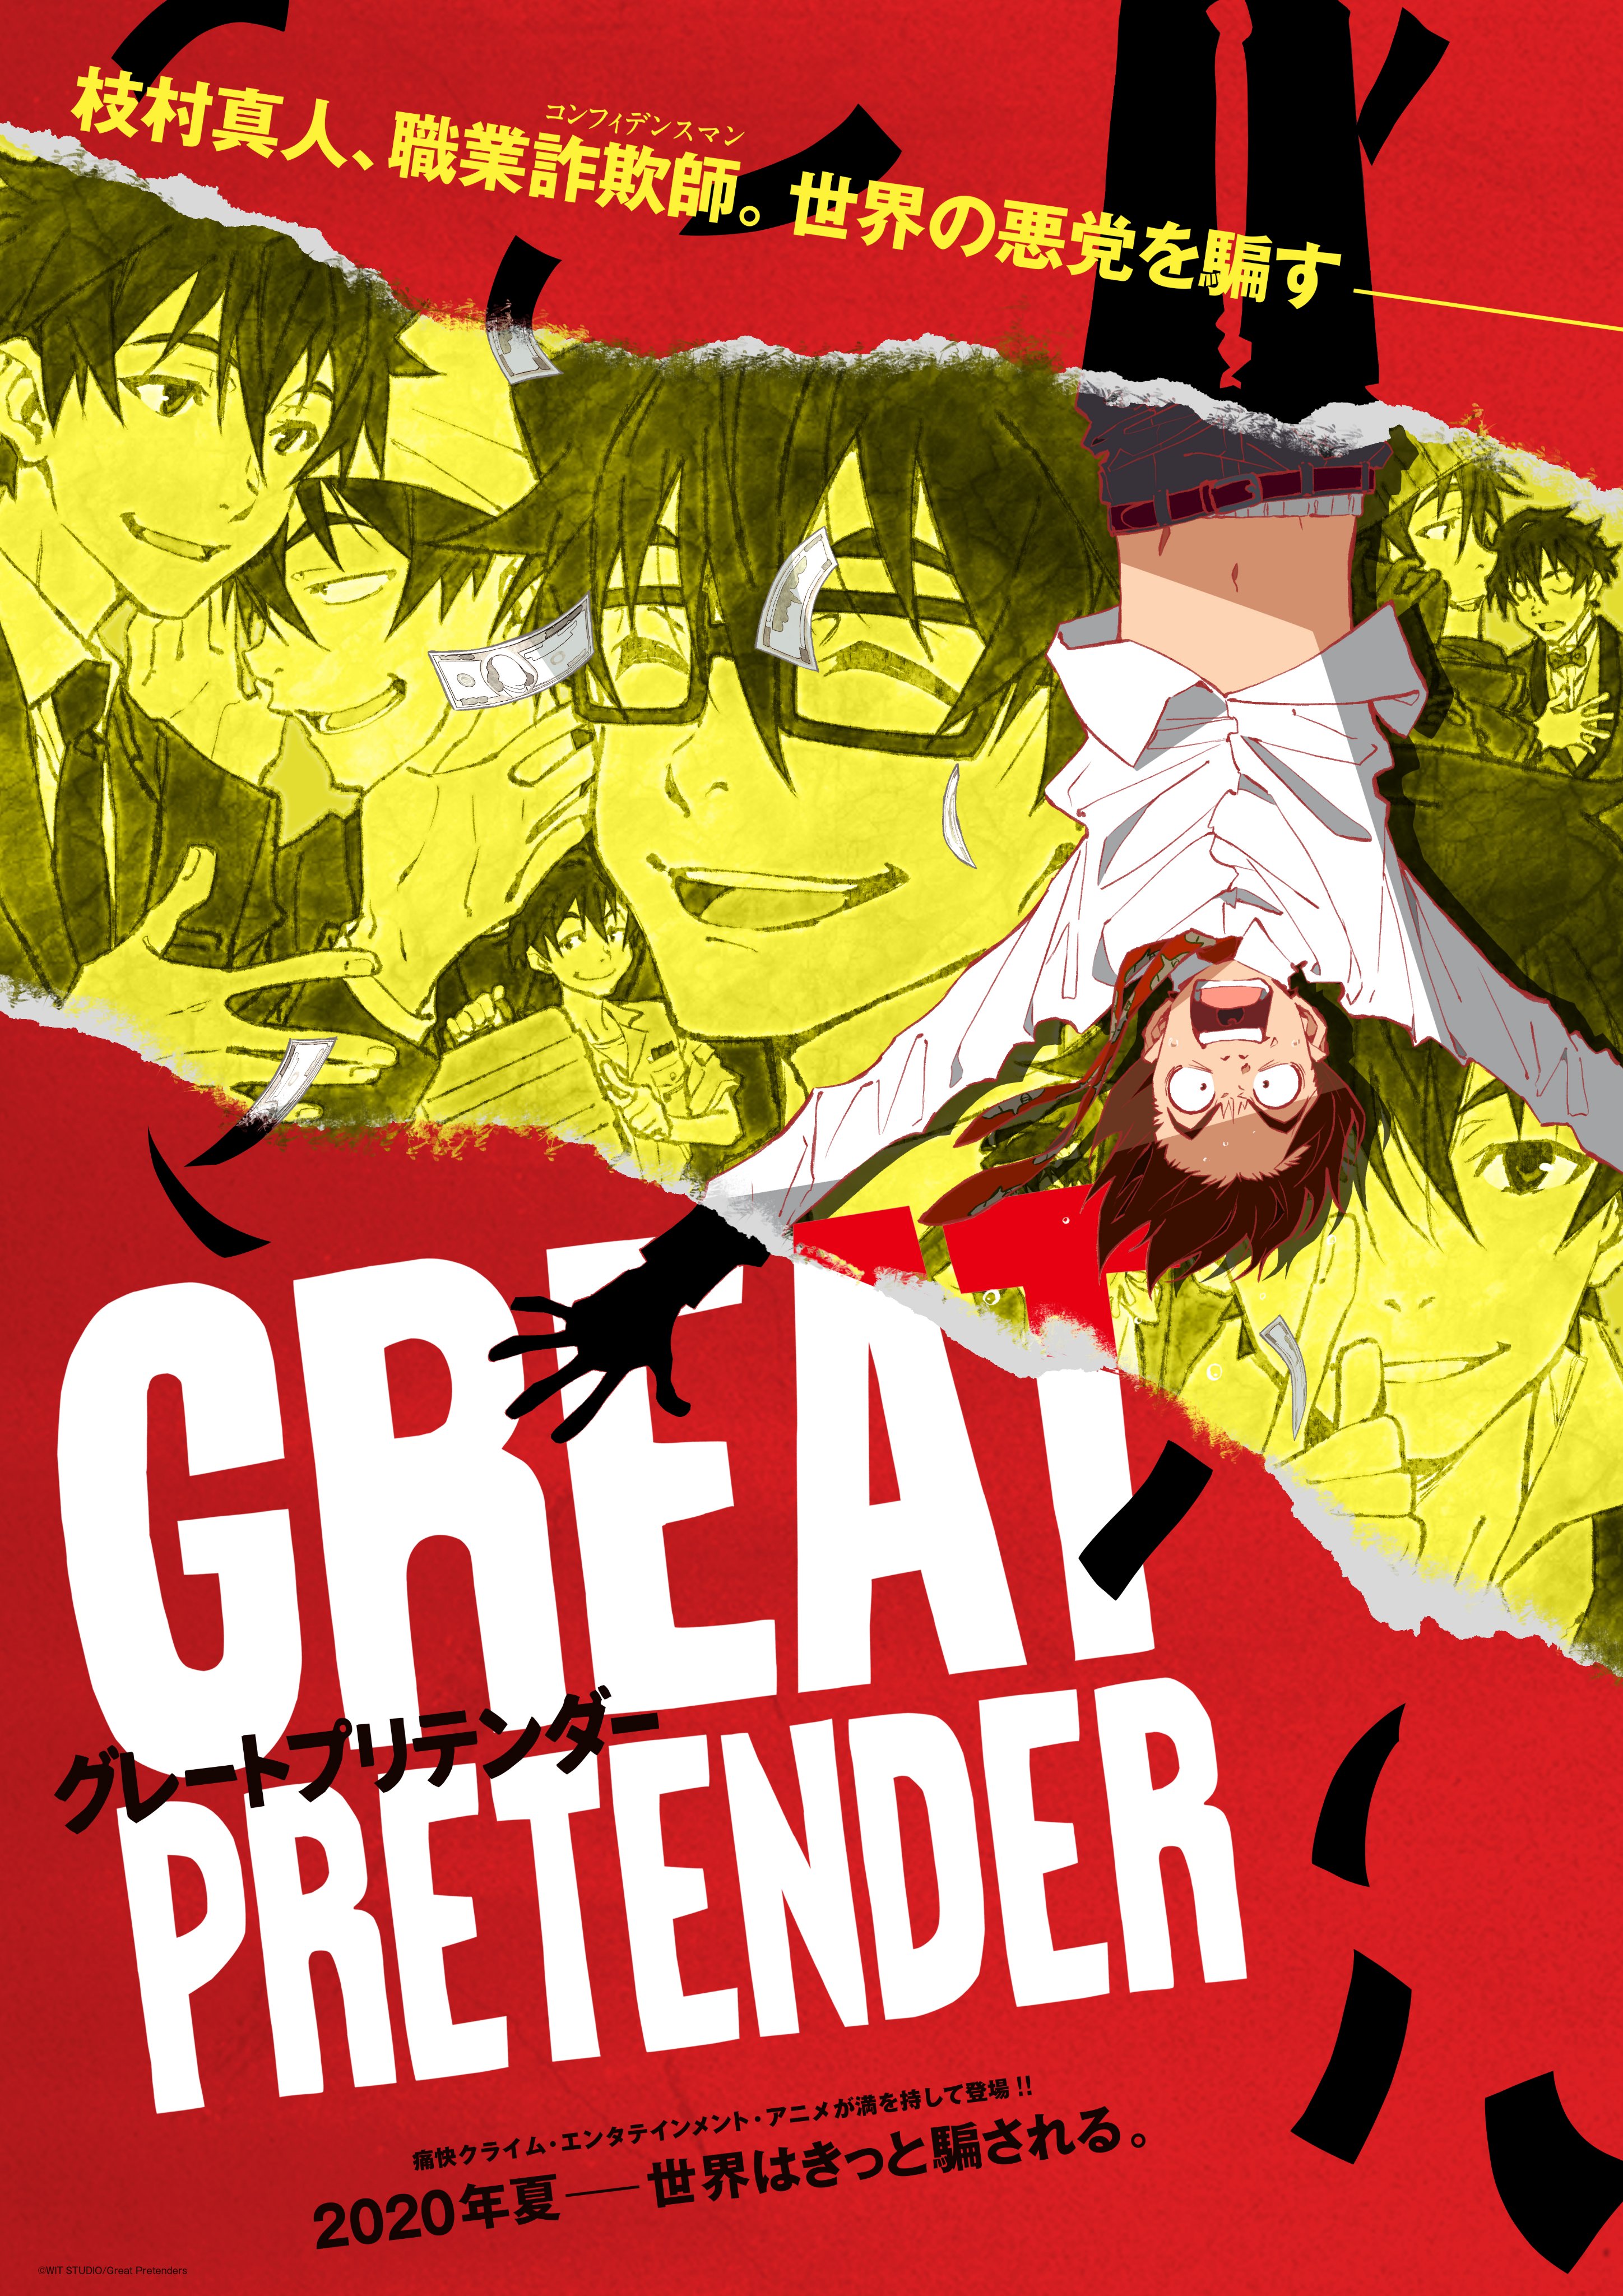 ANIME GREAT PRETENDER COMPLETE TV SERIES VOL.1-23 END DVD ENG SUBS + FREE  ANIME | eBay